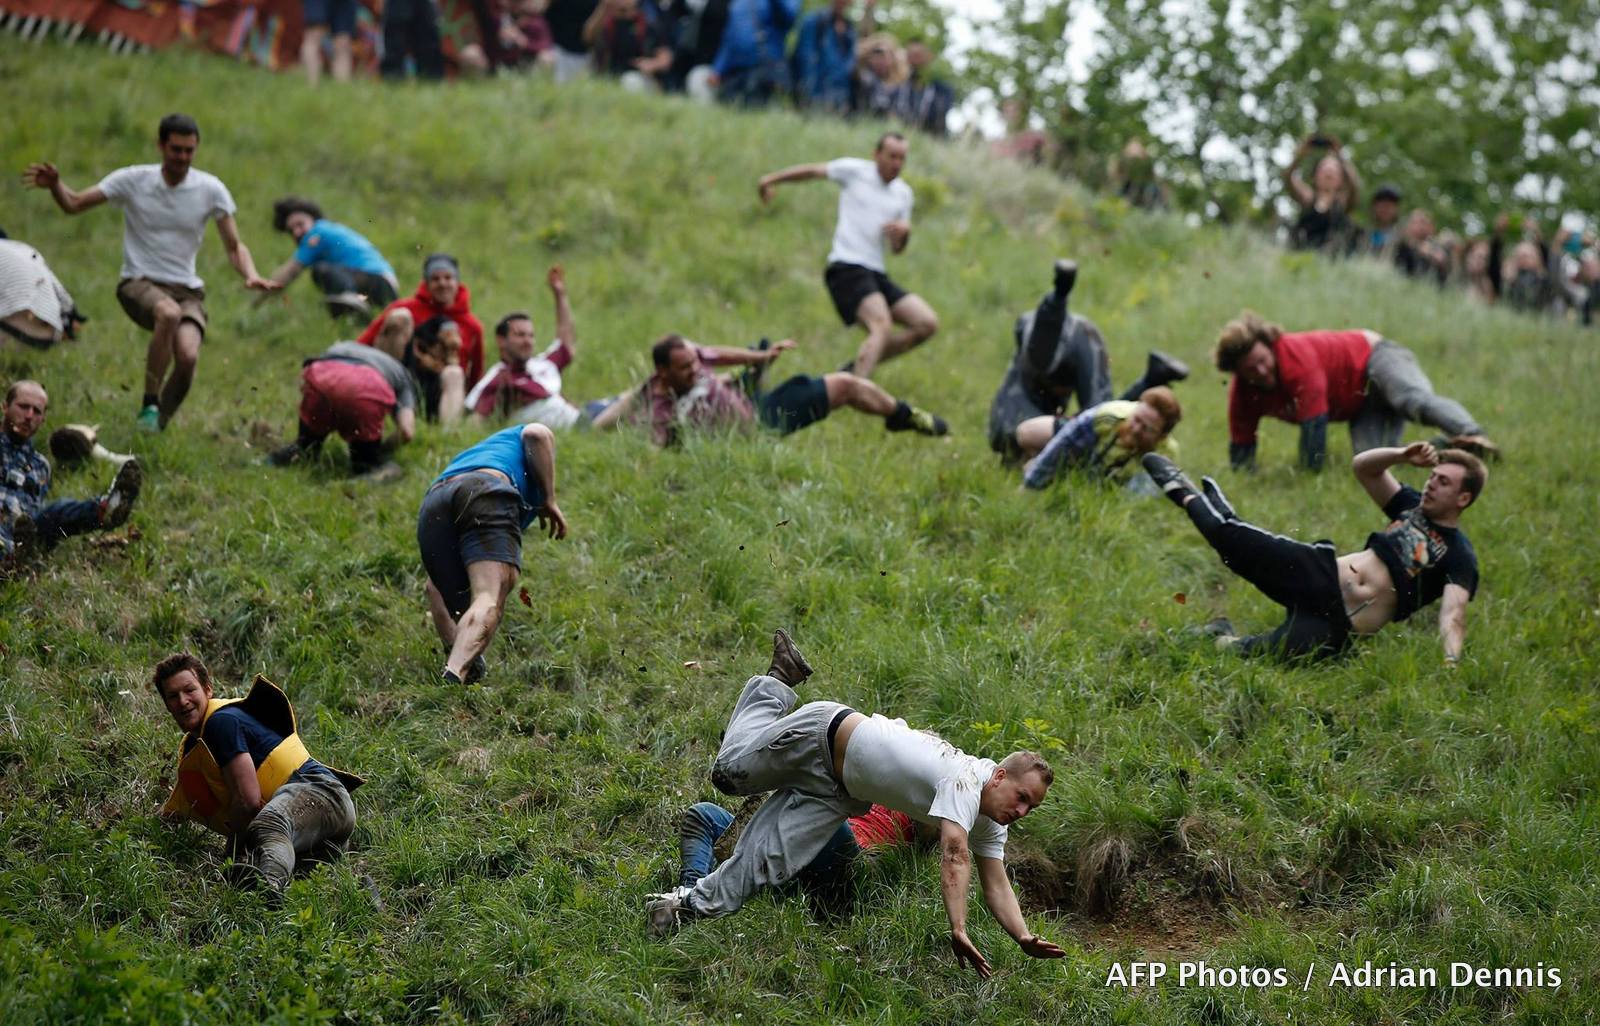 Venture just outside Bristol for the Cooper's Hill cheeserolling